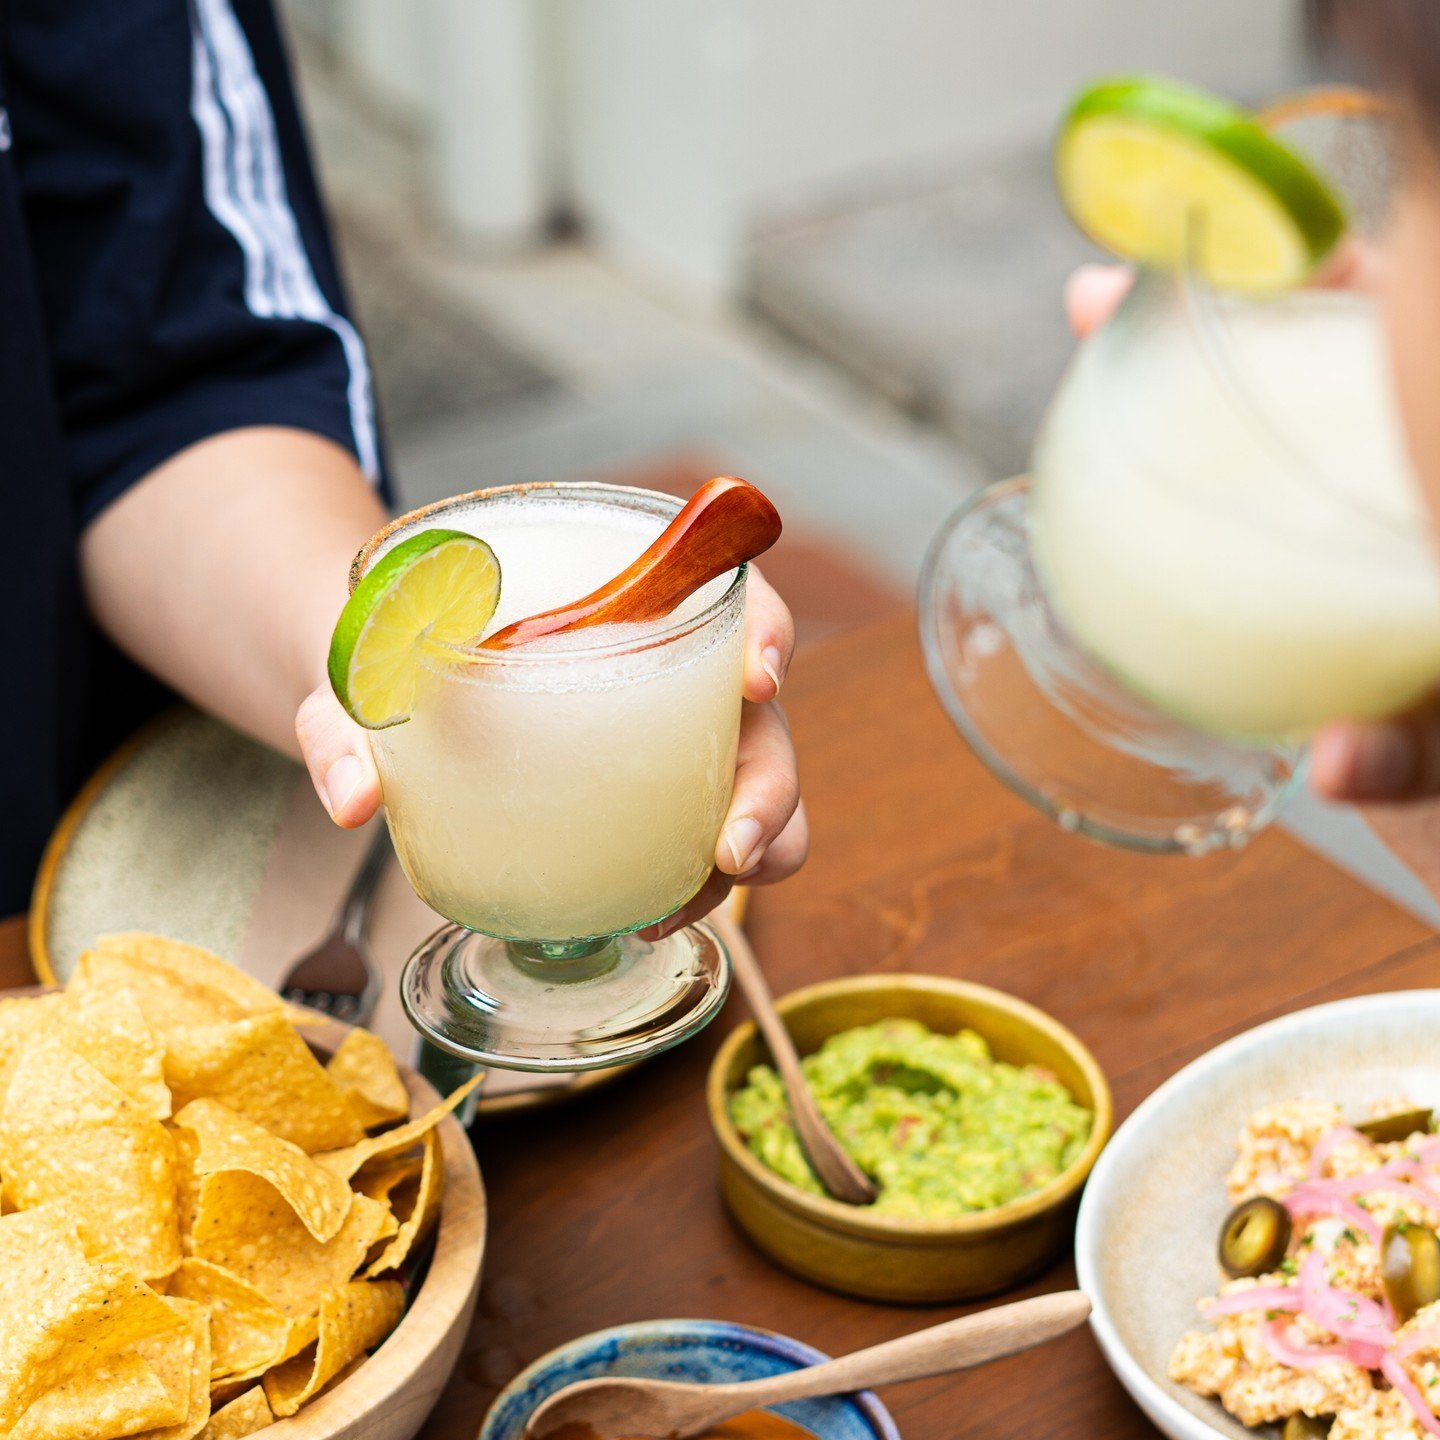 It's fiesta time from 3pm to 7pm, Monday to Saturday, when El Loco Hour makes all your mezcal-based dreams become a realidad! ⁠
⁠
Whether you're in the mood for a glass of vino, a refreshing cerveza, some cheeky shots, or a fruity frozen marg, we've 